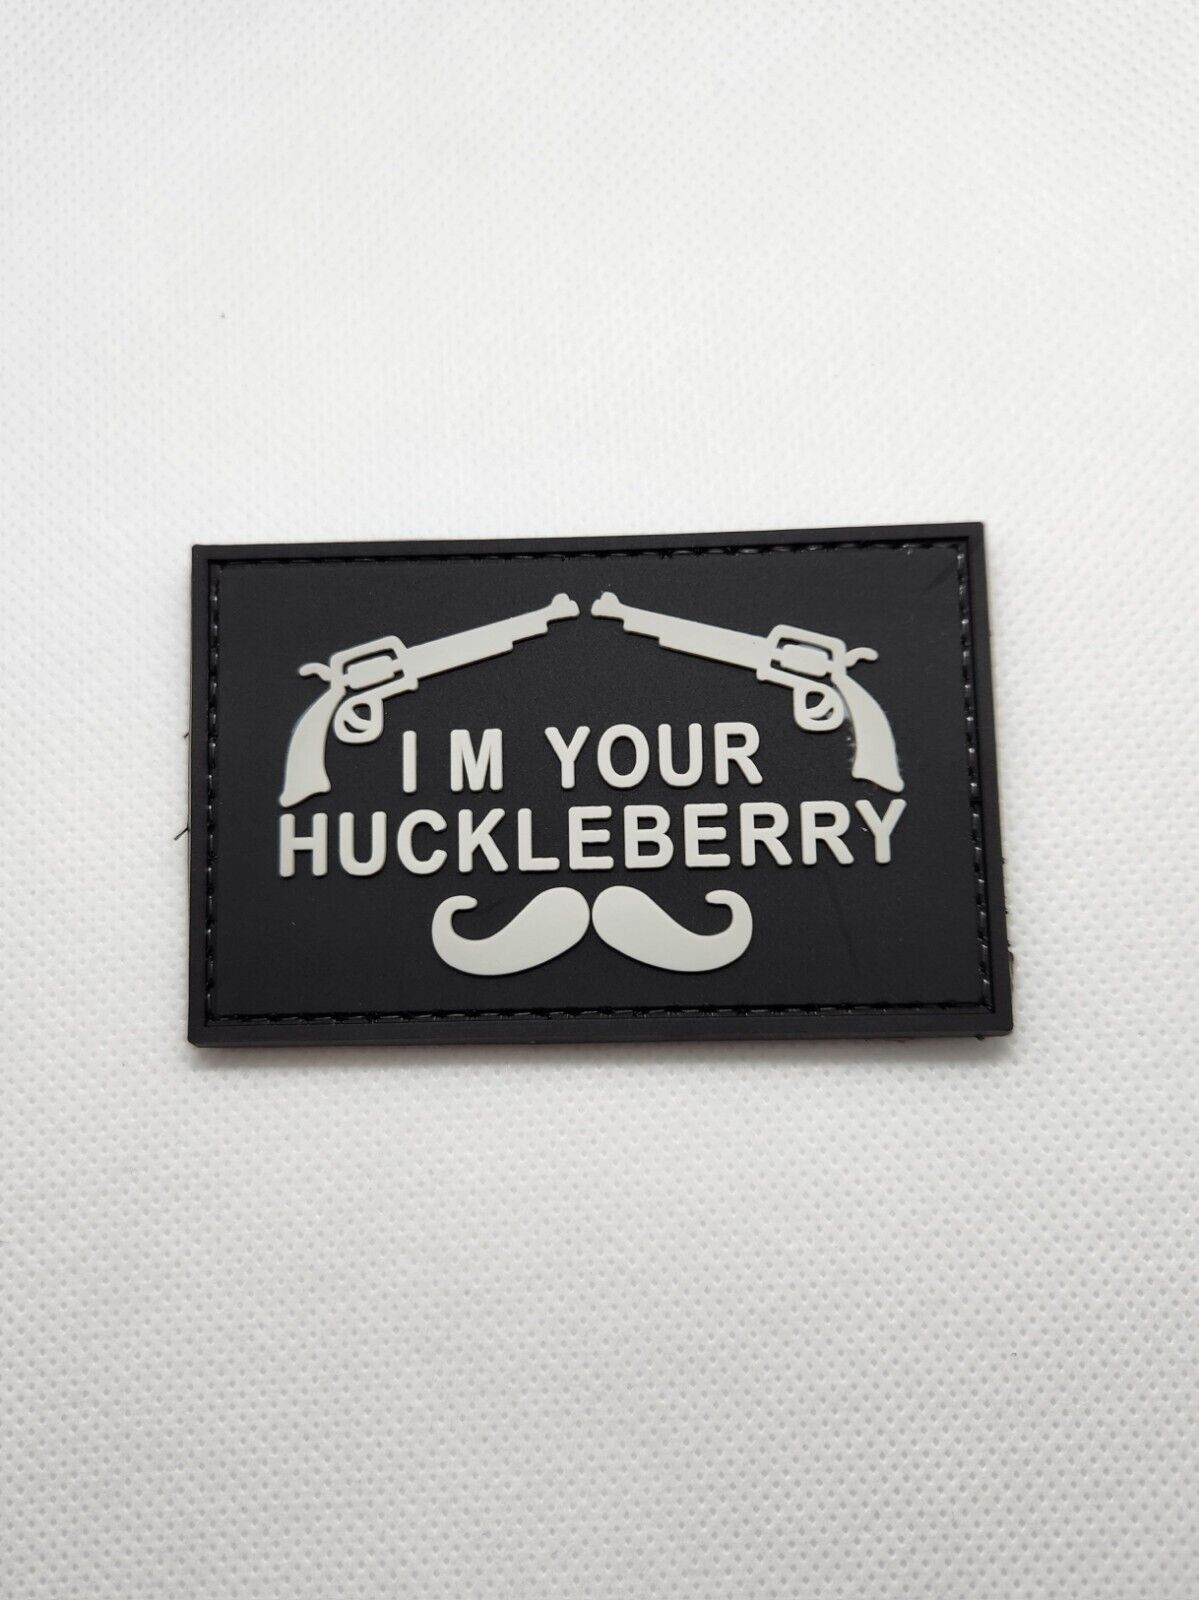 I\'m Your Huckleberry 3D PVC Tactical Morale Patch – Hook Backed